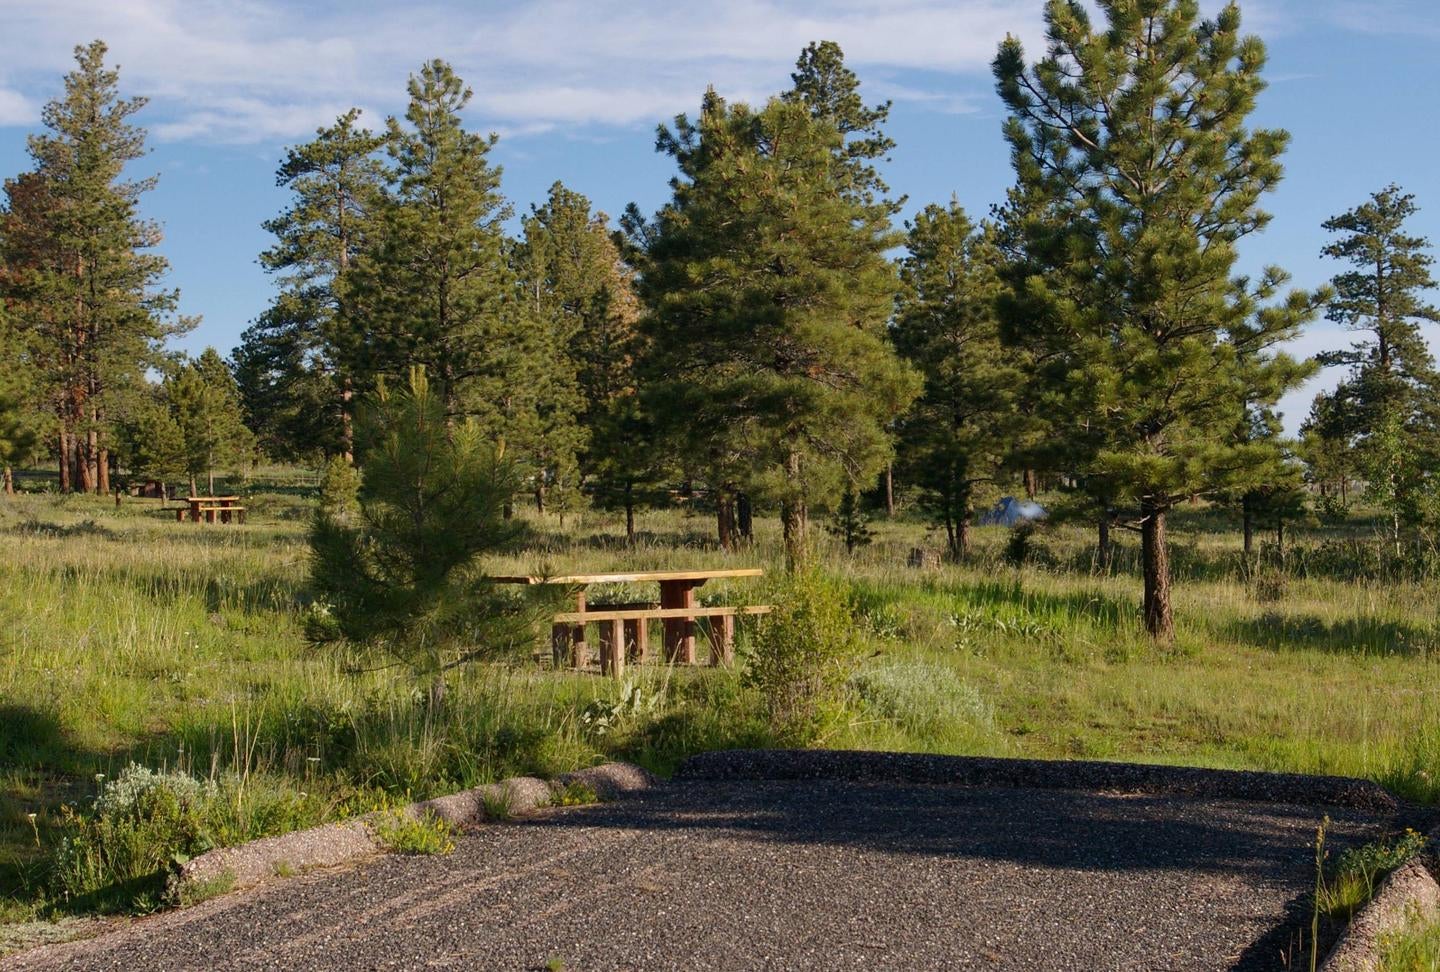 This site has a picnic table and grill in a grassy area to the back of the parking slot. There are a few trees that are in the background. 



Canyon Rim Campground

Credit: U.S. Forest Service